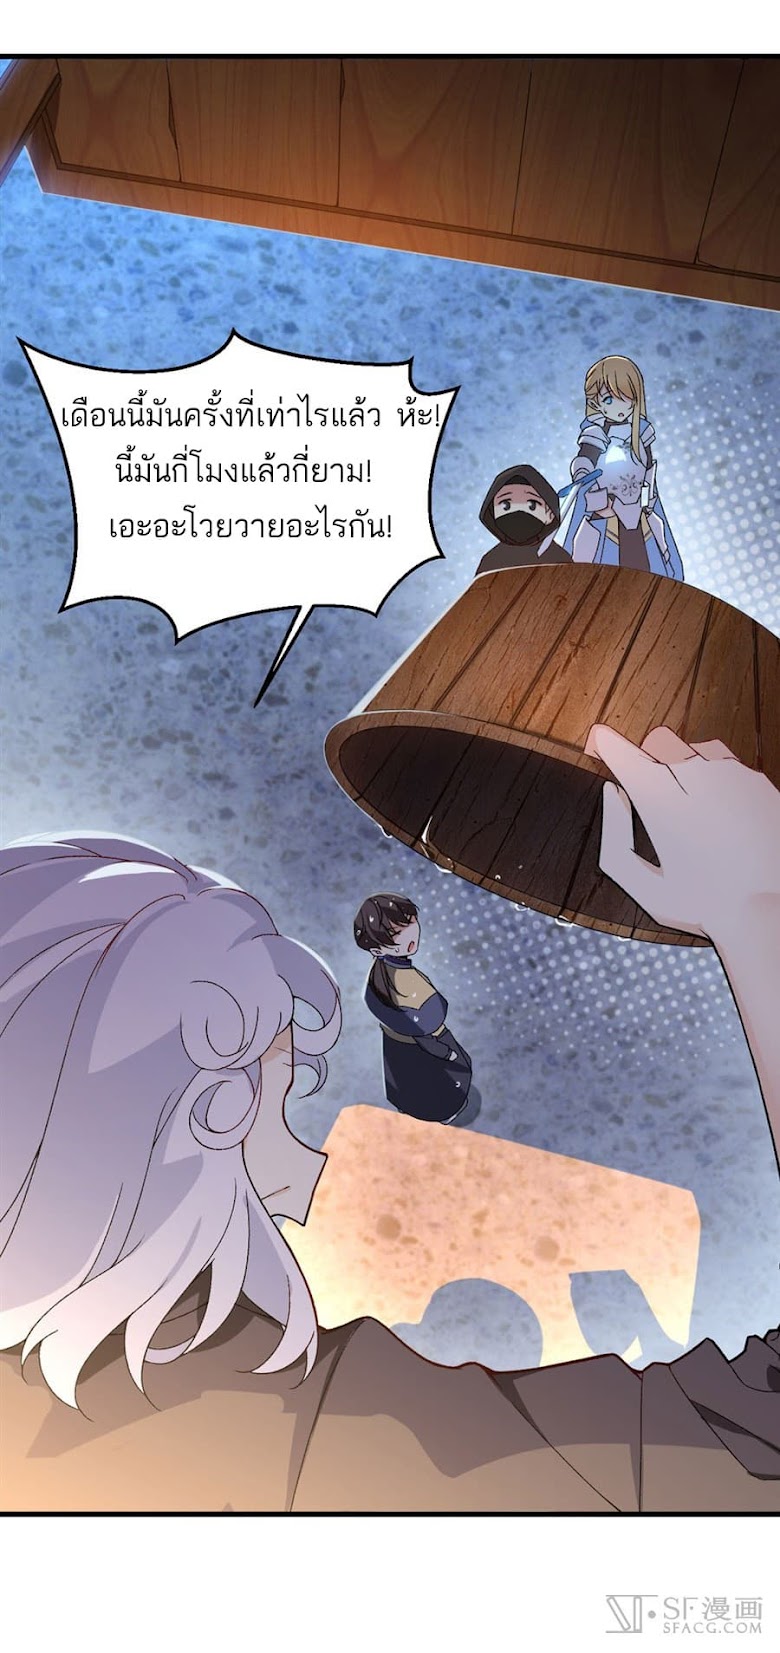 Nobleman and so what? - หน้า 22